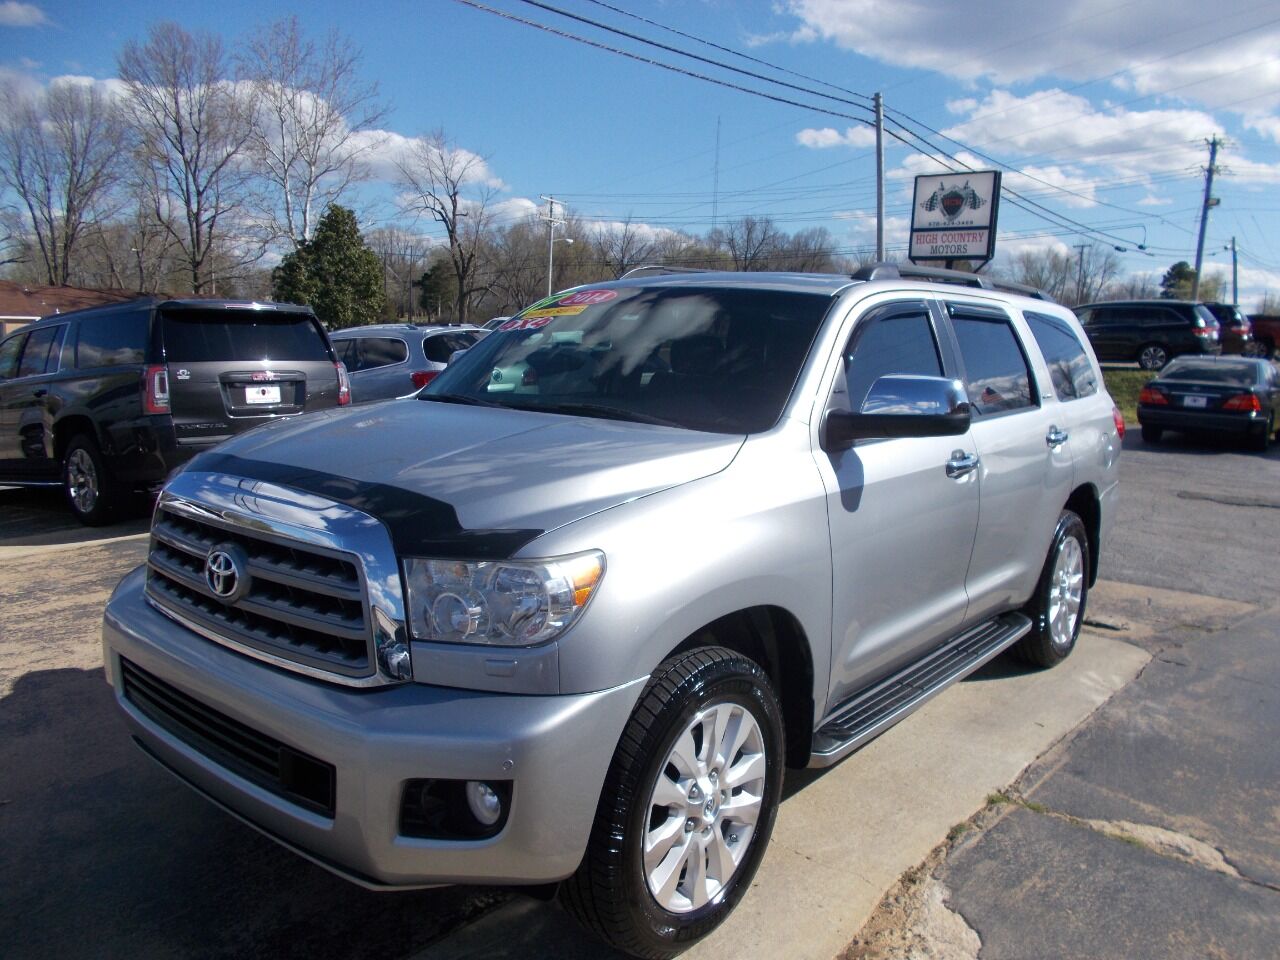 The specifications, price, MPG, and reviews of the 2014 Toyota Sequoia as listed on Cars.com.